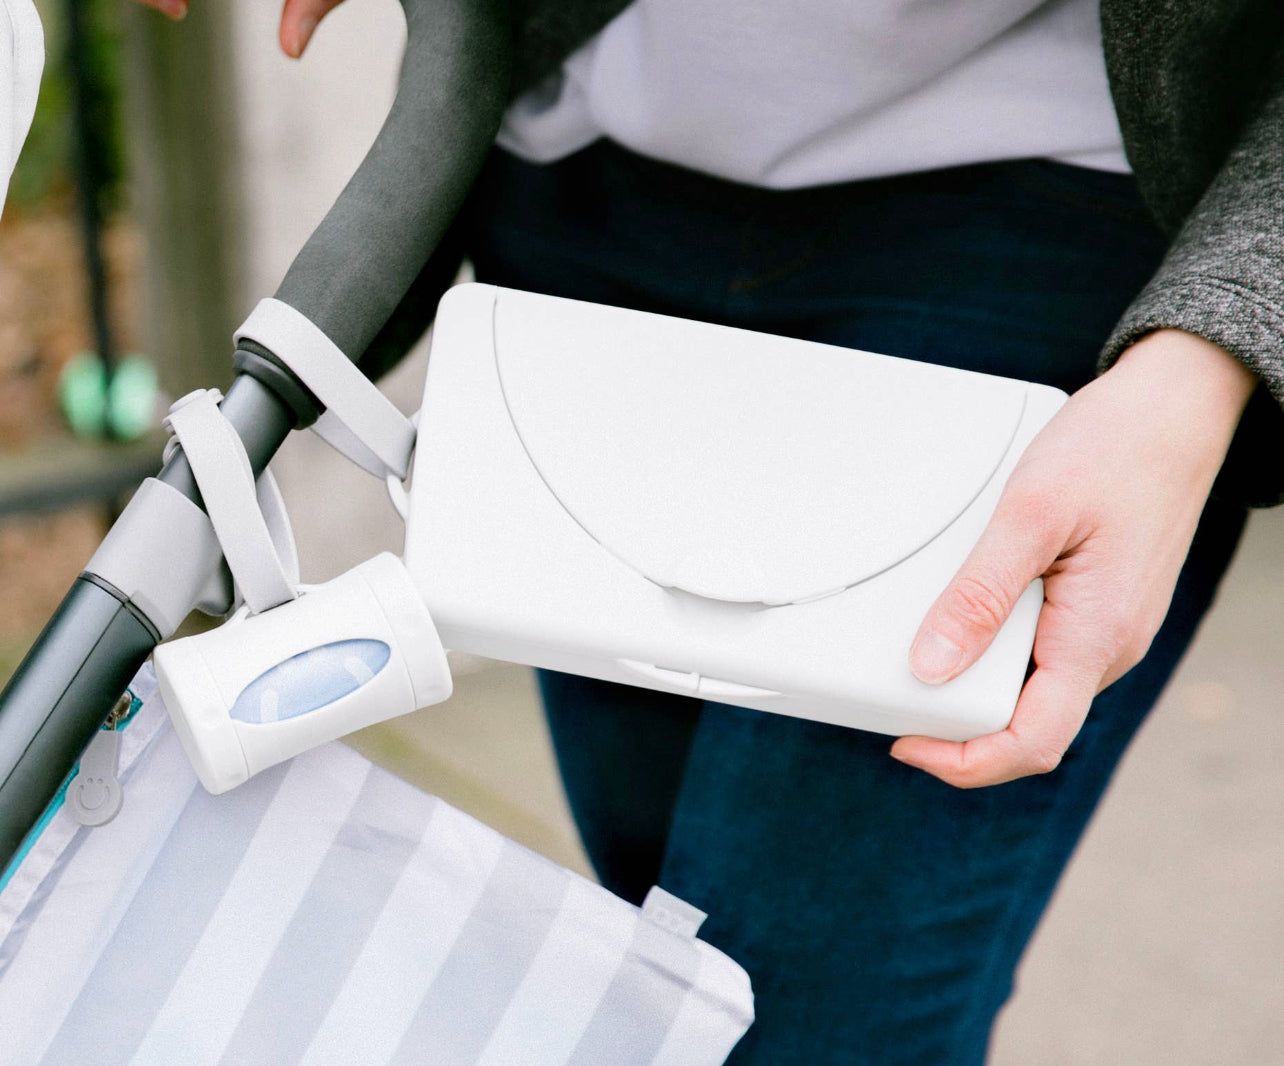 on the go, easy and quick access to diaper bags